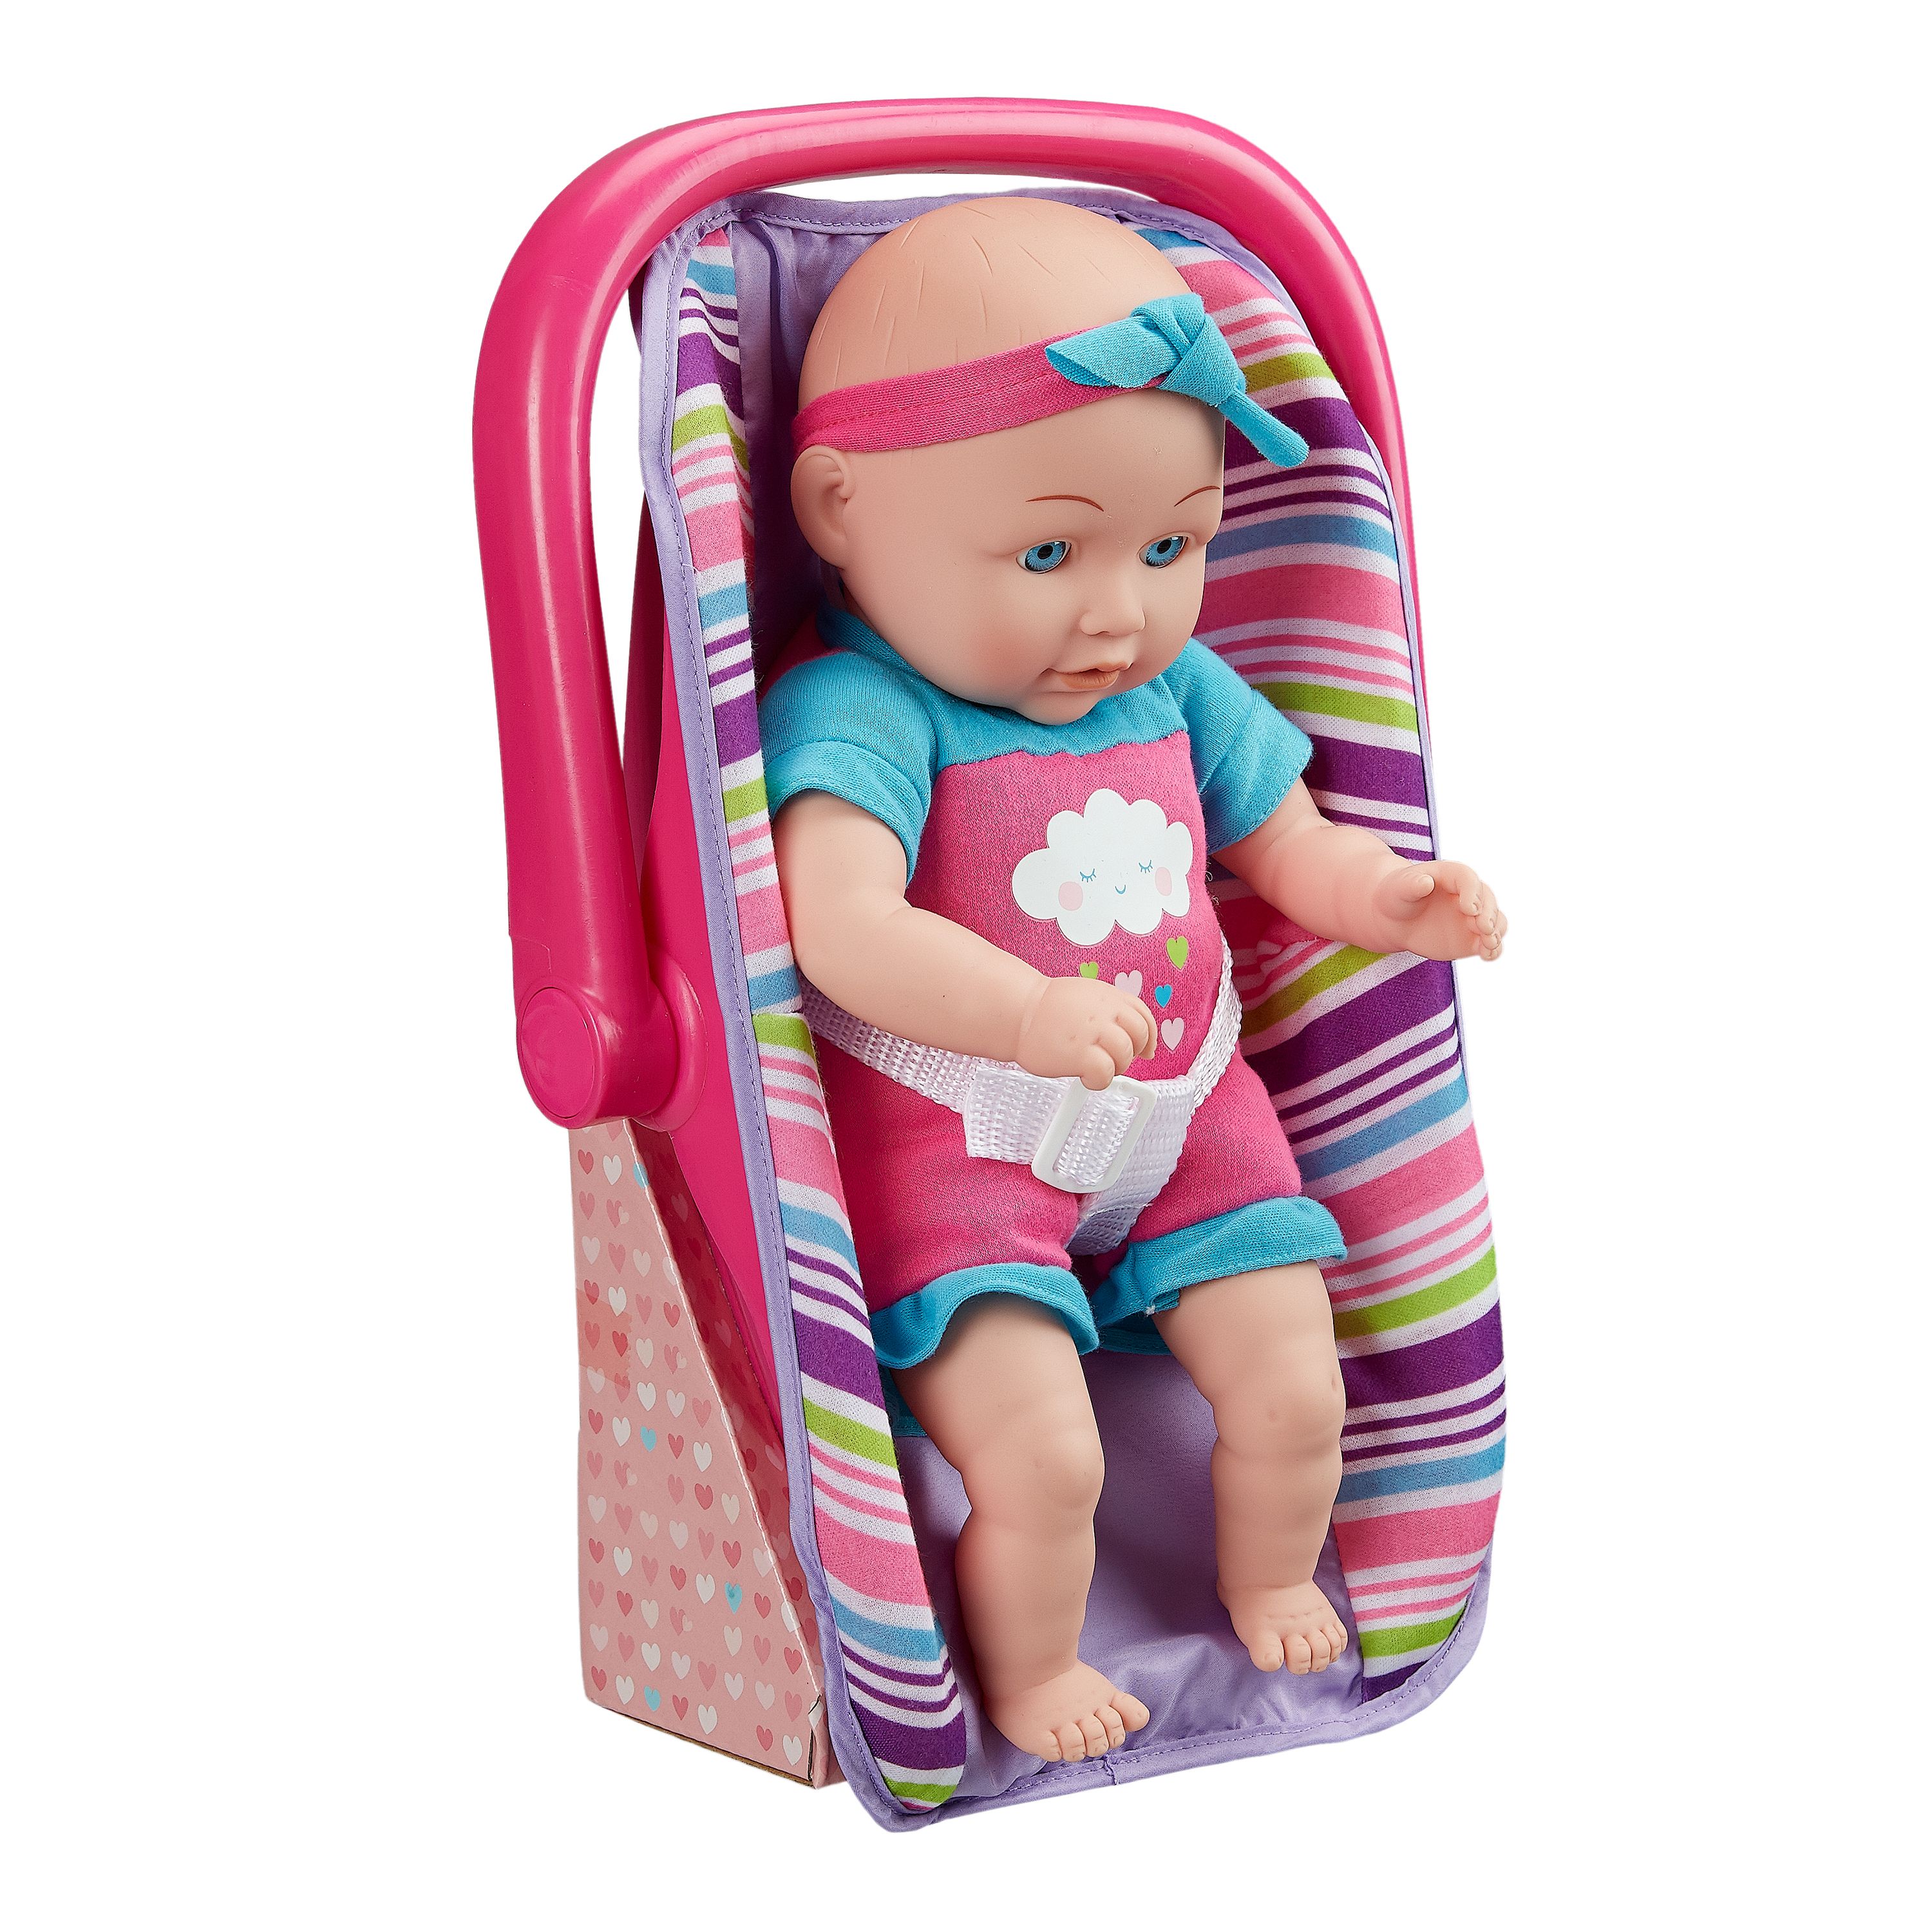 My Sweet Love 13" Baby with Carrier Play Set Doll Pink 4-Piece - image 2 of 4